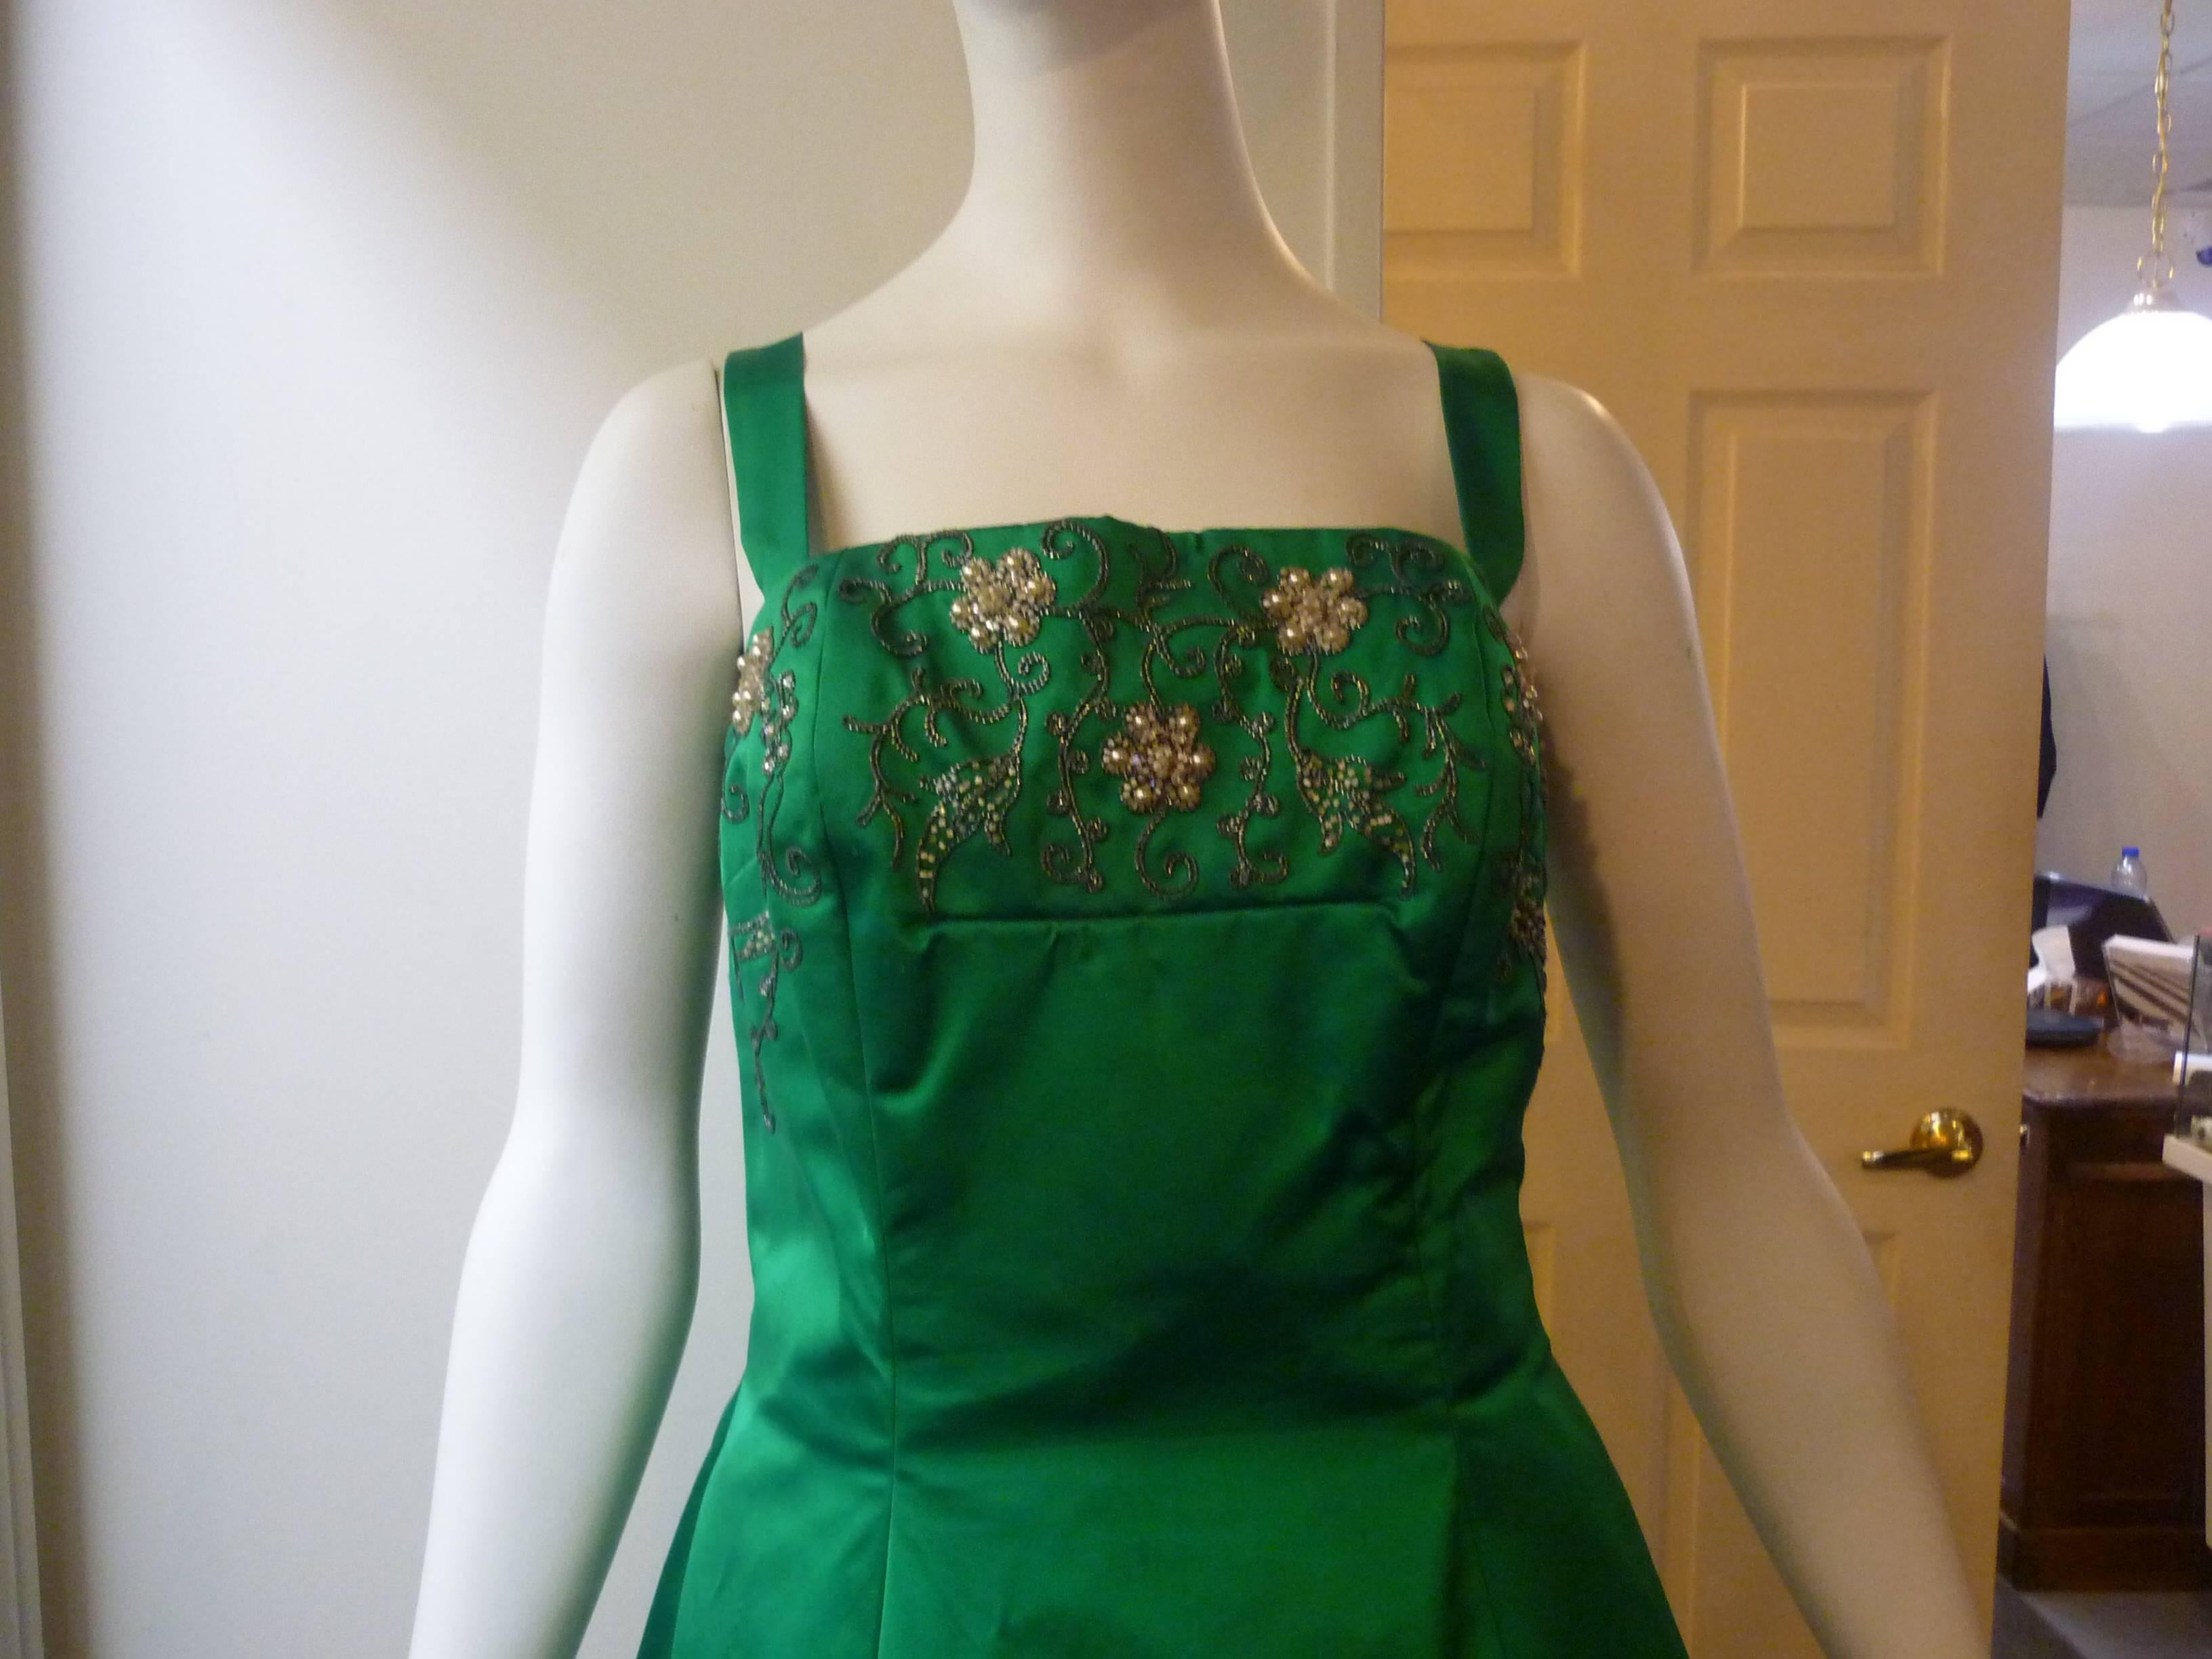 As seen in Vogue (England) in 1963, this is a beautiful emerald green satin gown adorned with metal thread work, as well as beadwork (bugle beads, pearls and sparkling crystals). These are all embroidered directly to the gown by hand.

The tailor